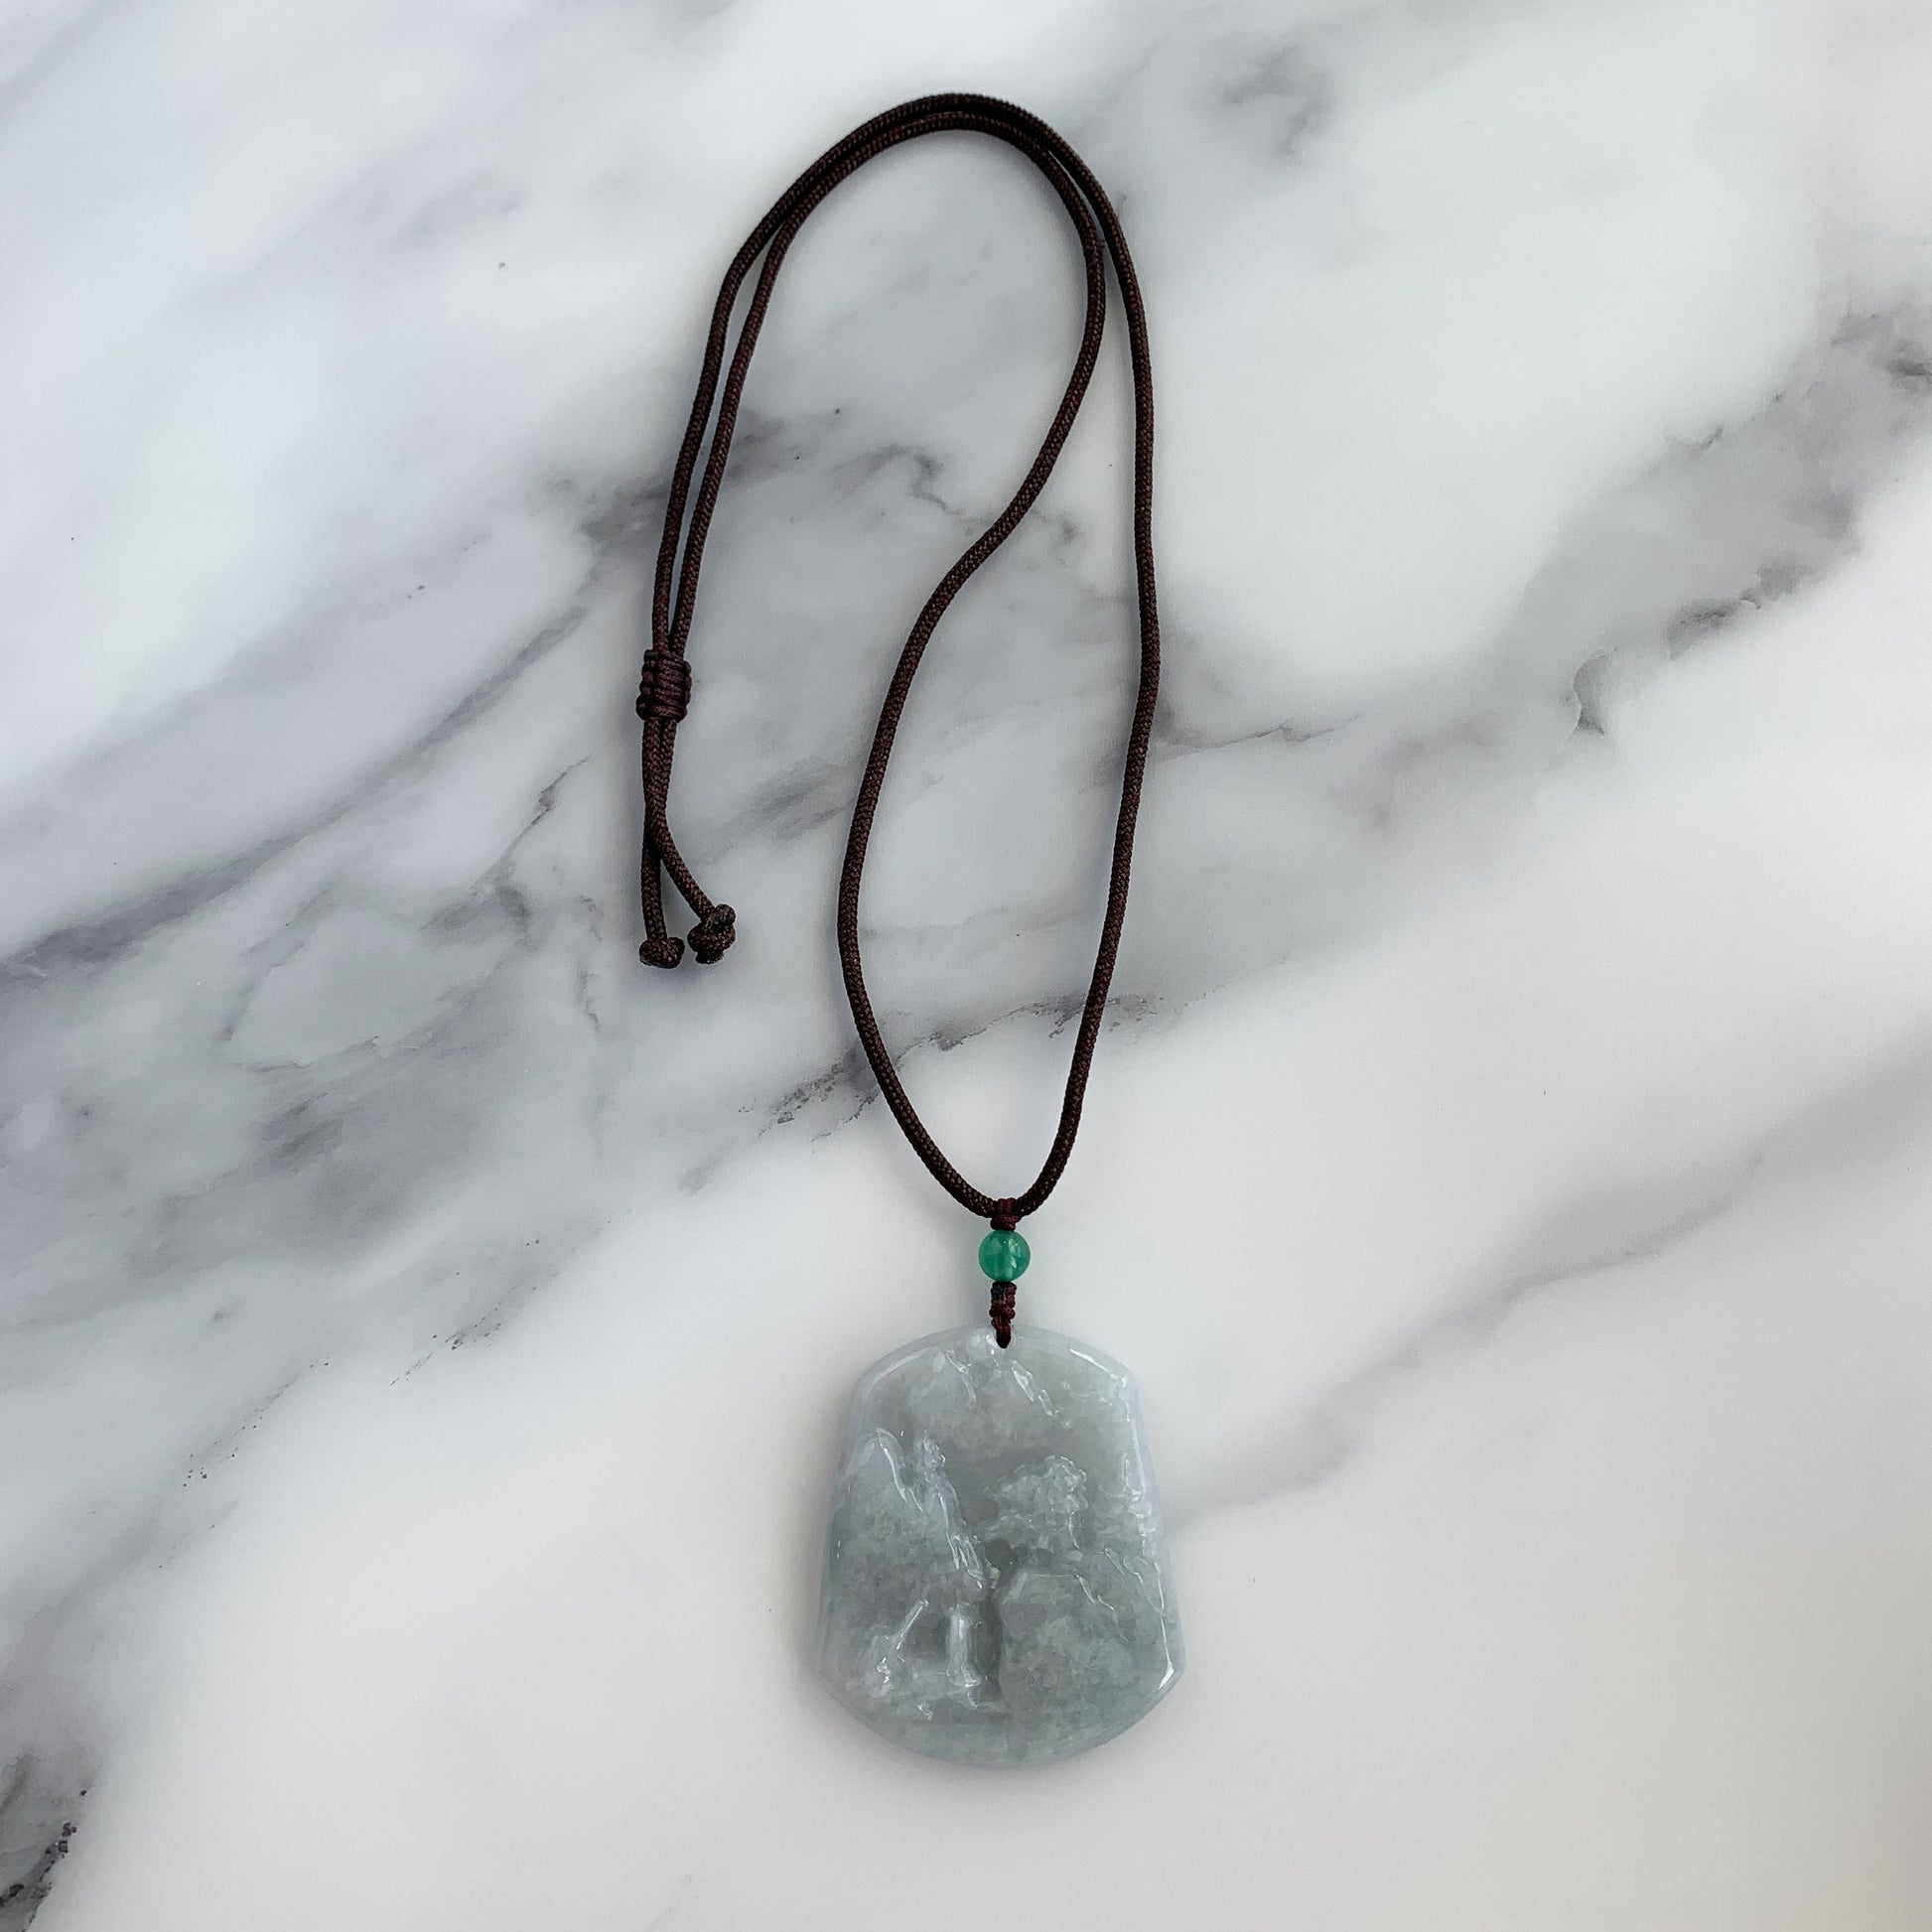 Jadeite Jade Landscape Mountain Forest River Scenery Hand Carved Pendant Necklace, YJ-0321-0342930-1 - AriaDesignCollection